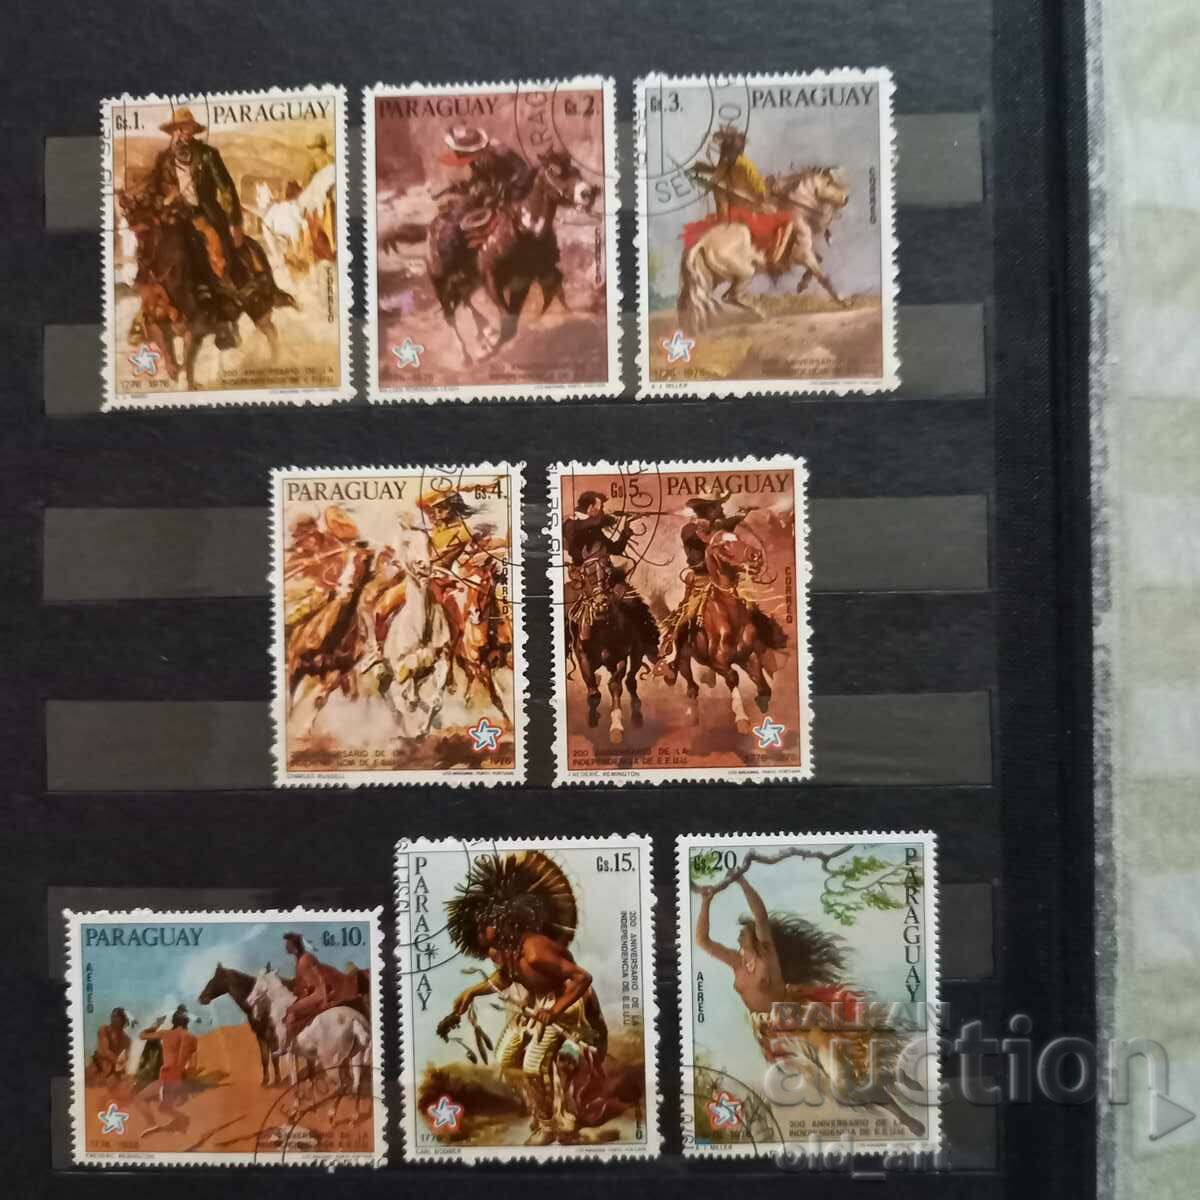 Postage stamps - Paraguay, 1976, Paintings with horses